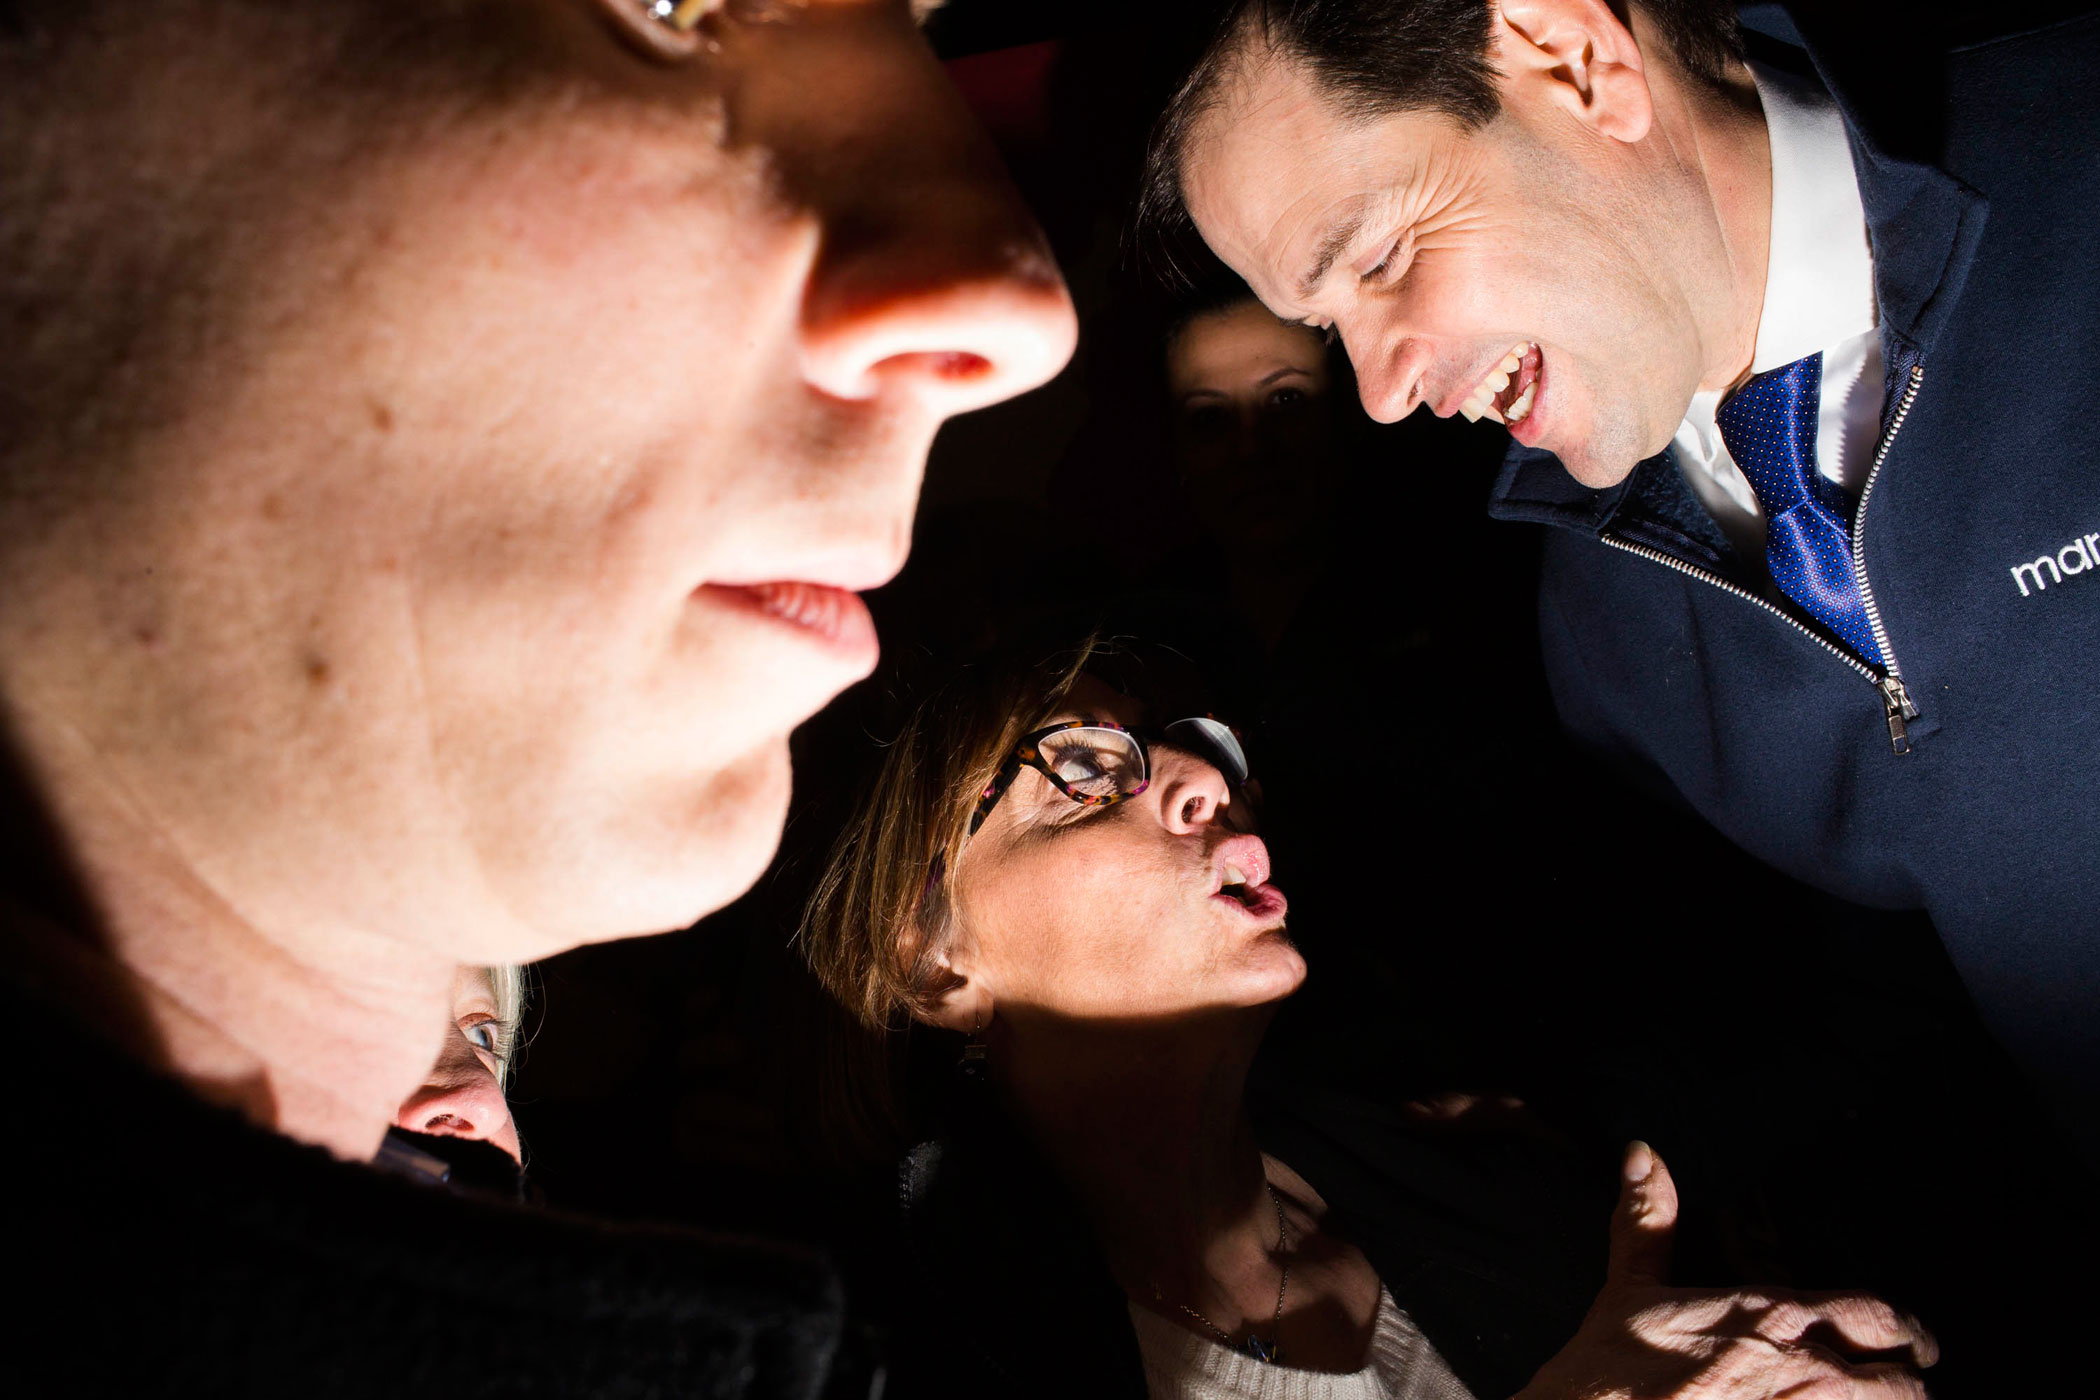 Florida. Sen. Marco Rubio greets supporters during a campaign event at the Allard Center in Manchester, N.H.  on Feb. 7, 2016.